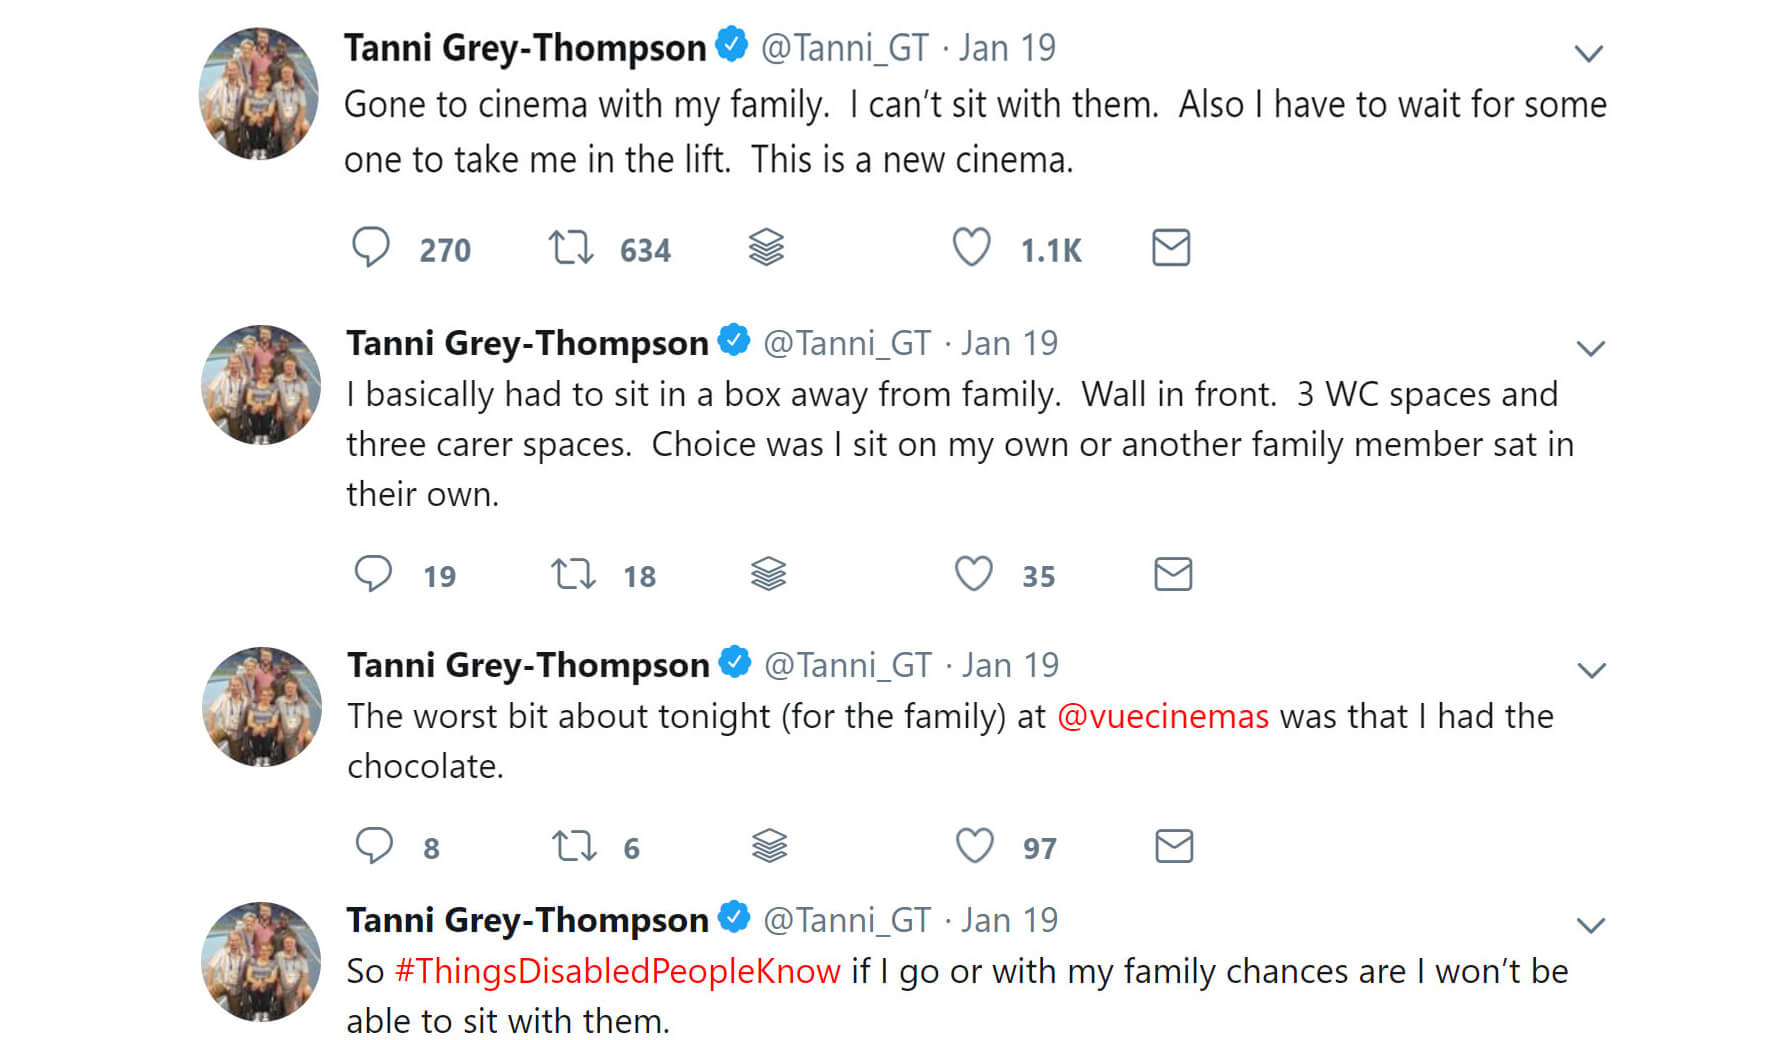 Screenshots of Tanni Grey-Thompson tweets about her experience at Vue Cinemas when she couldn't sit with her family.